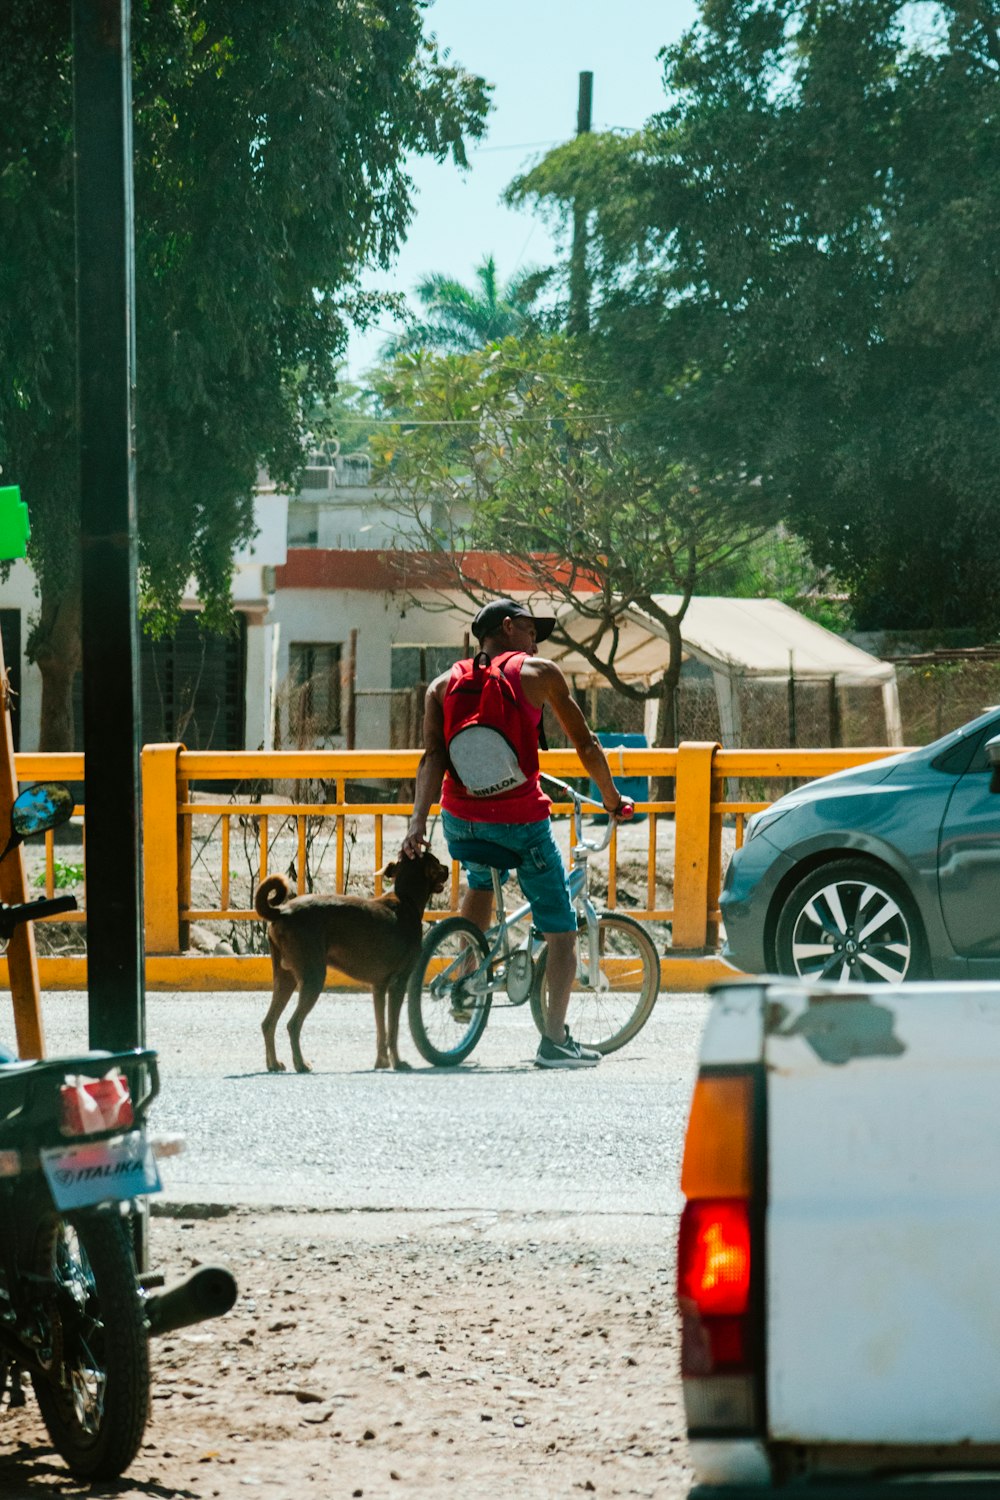 a person with a bicycle and a dog on a leash